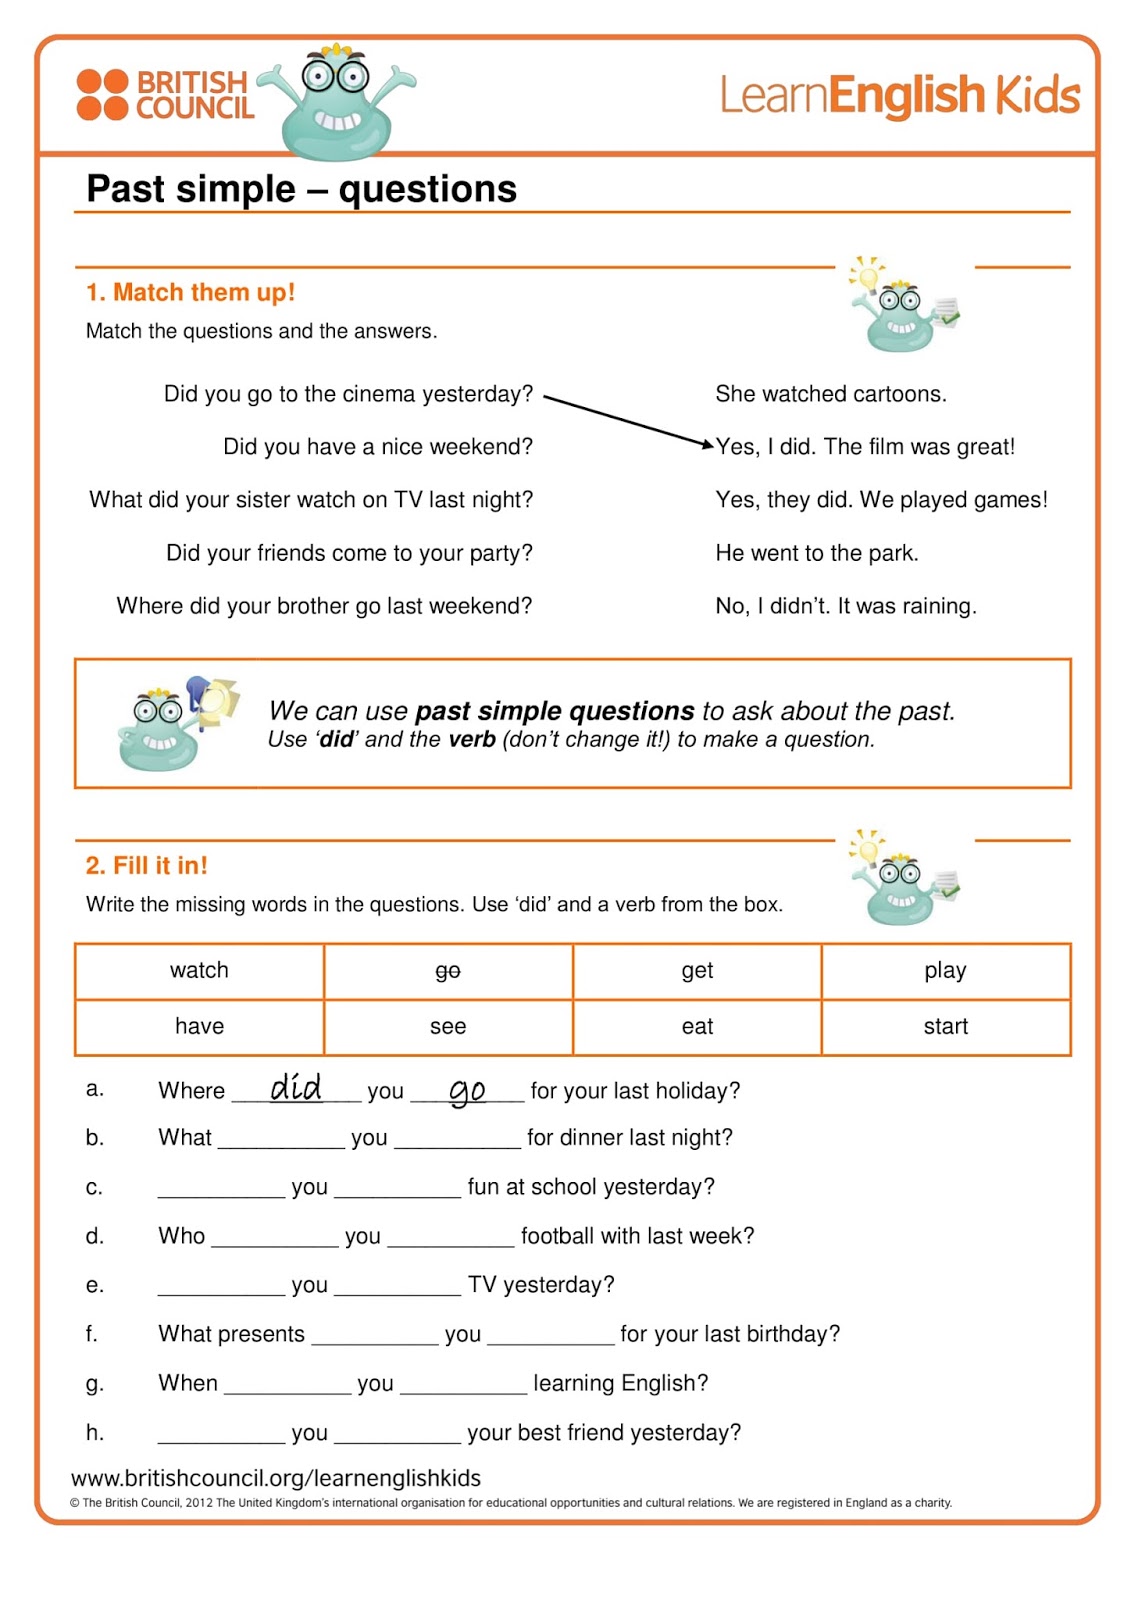 Questions test english. British Council for Kids past simple questions. Past simple вопросы Worksheets. Past simple английский Worksheets. Специальные вопросы в past simple Worksheets.